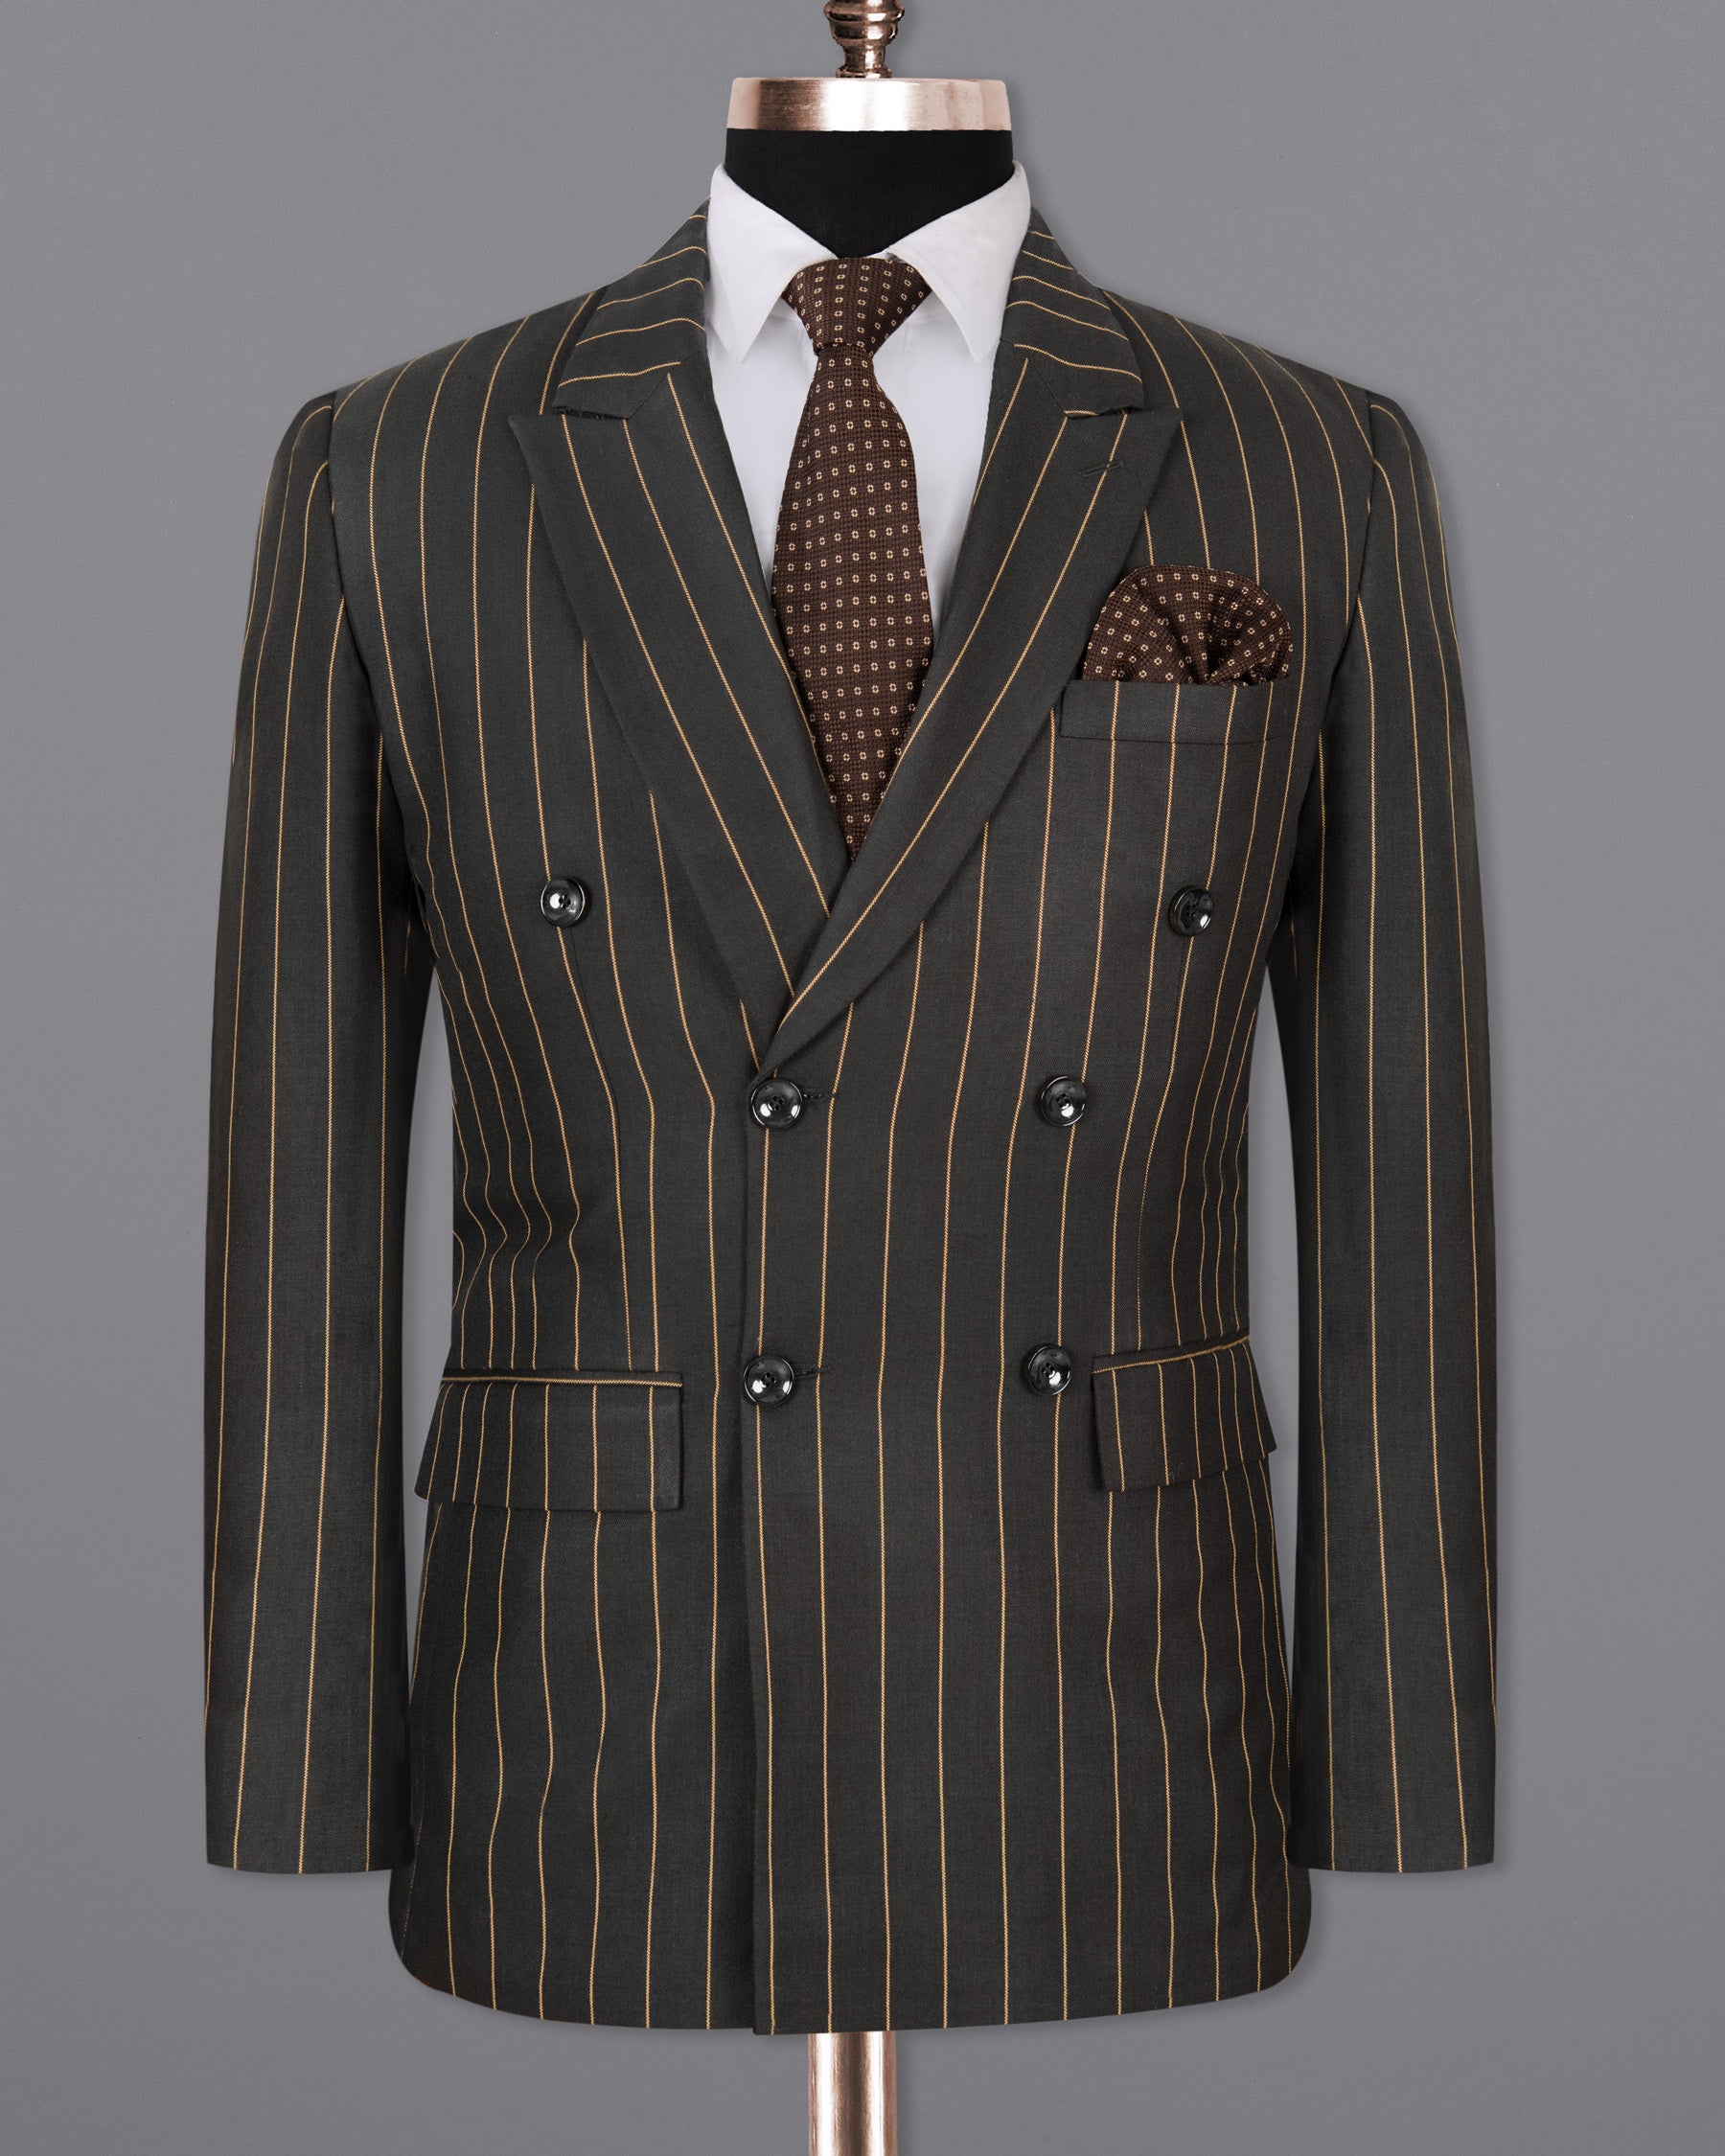 Charcoal Gray with Corvette Yellow Striped DouSTe-Breasted Woolrich Suit ST1289-DB-36, ST1289-DB-38, ST1289-DB-40, ST1289-DB-42, ST1289-DB-44, ST1289-DB-46, ST1289-DB-48, ST1289-DB-50, ST1289-DB-52, ST1289-DB-54, ST1289-DB-56, ST1289-DB-58, ST1289-DB-60